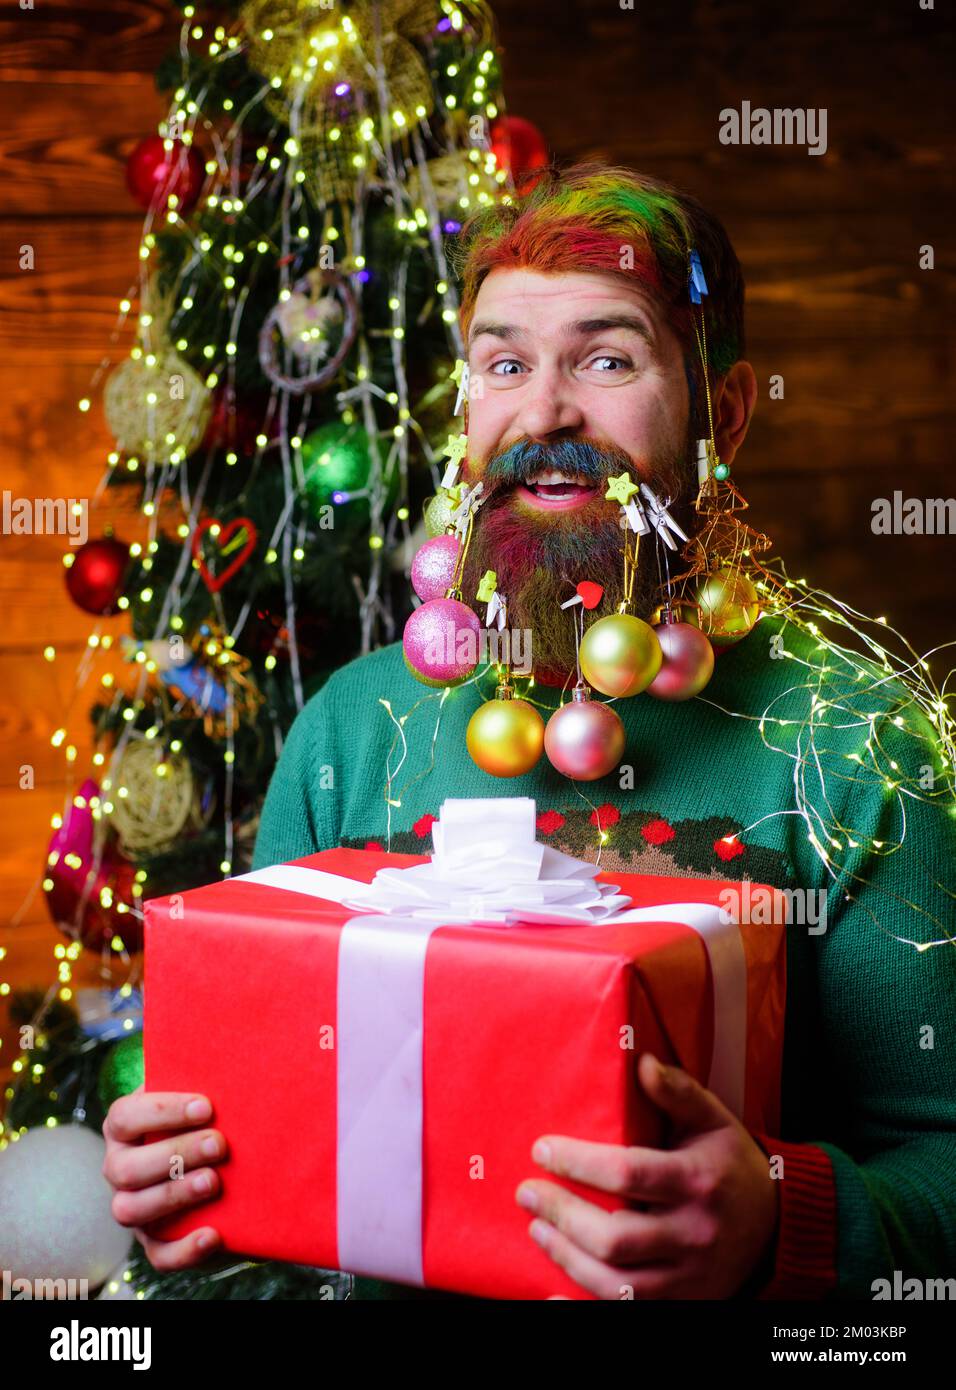 Merry Christmas and happy new year. Smiling man with decorated beard holds gift box. Winter holiday. Stock Photo